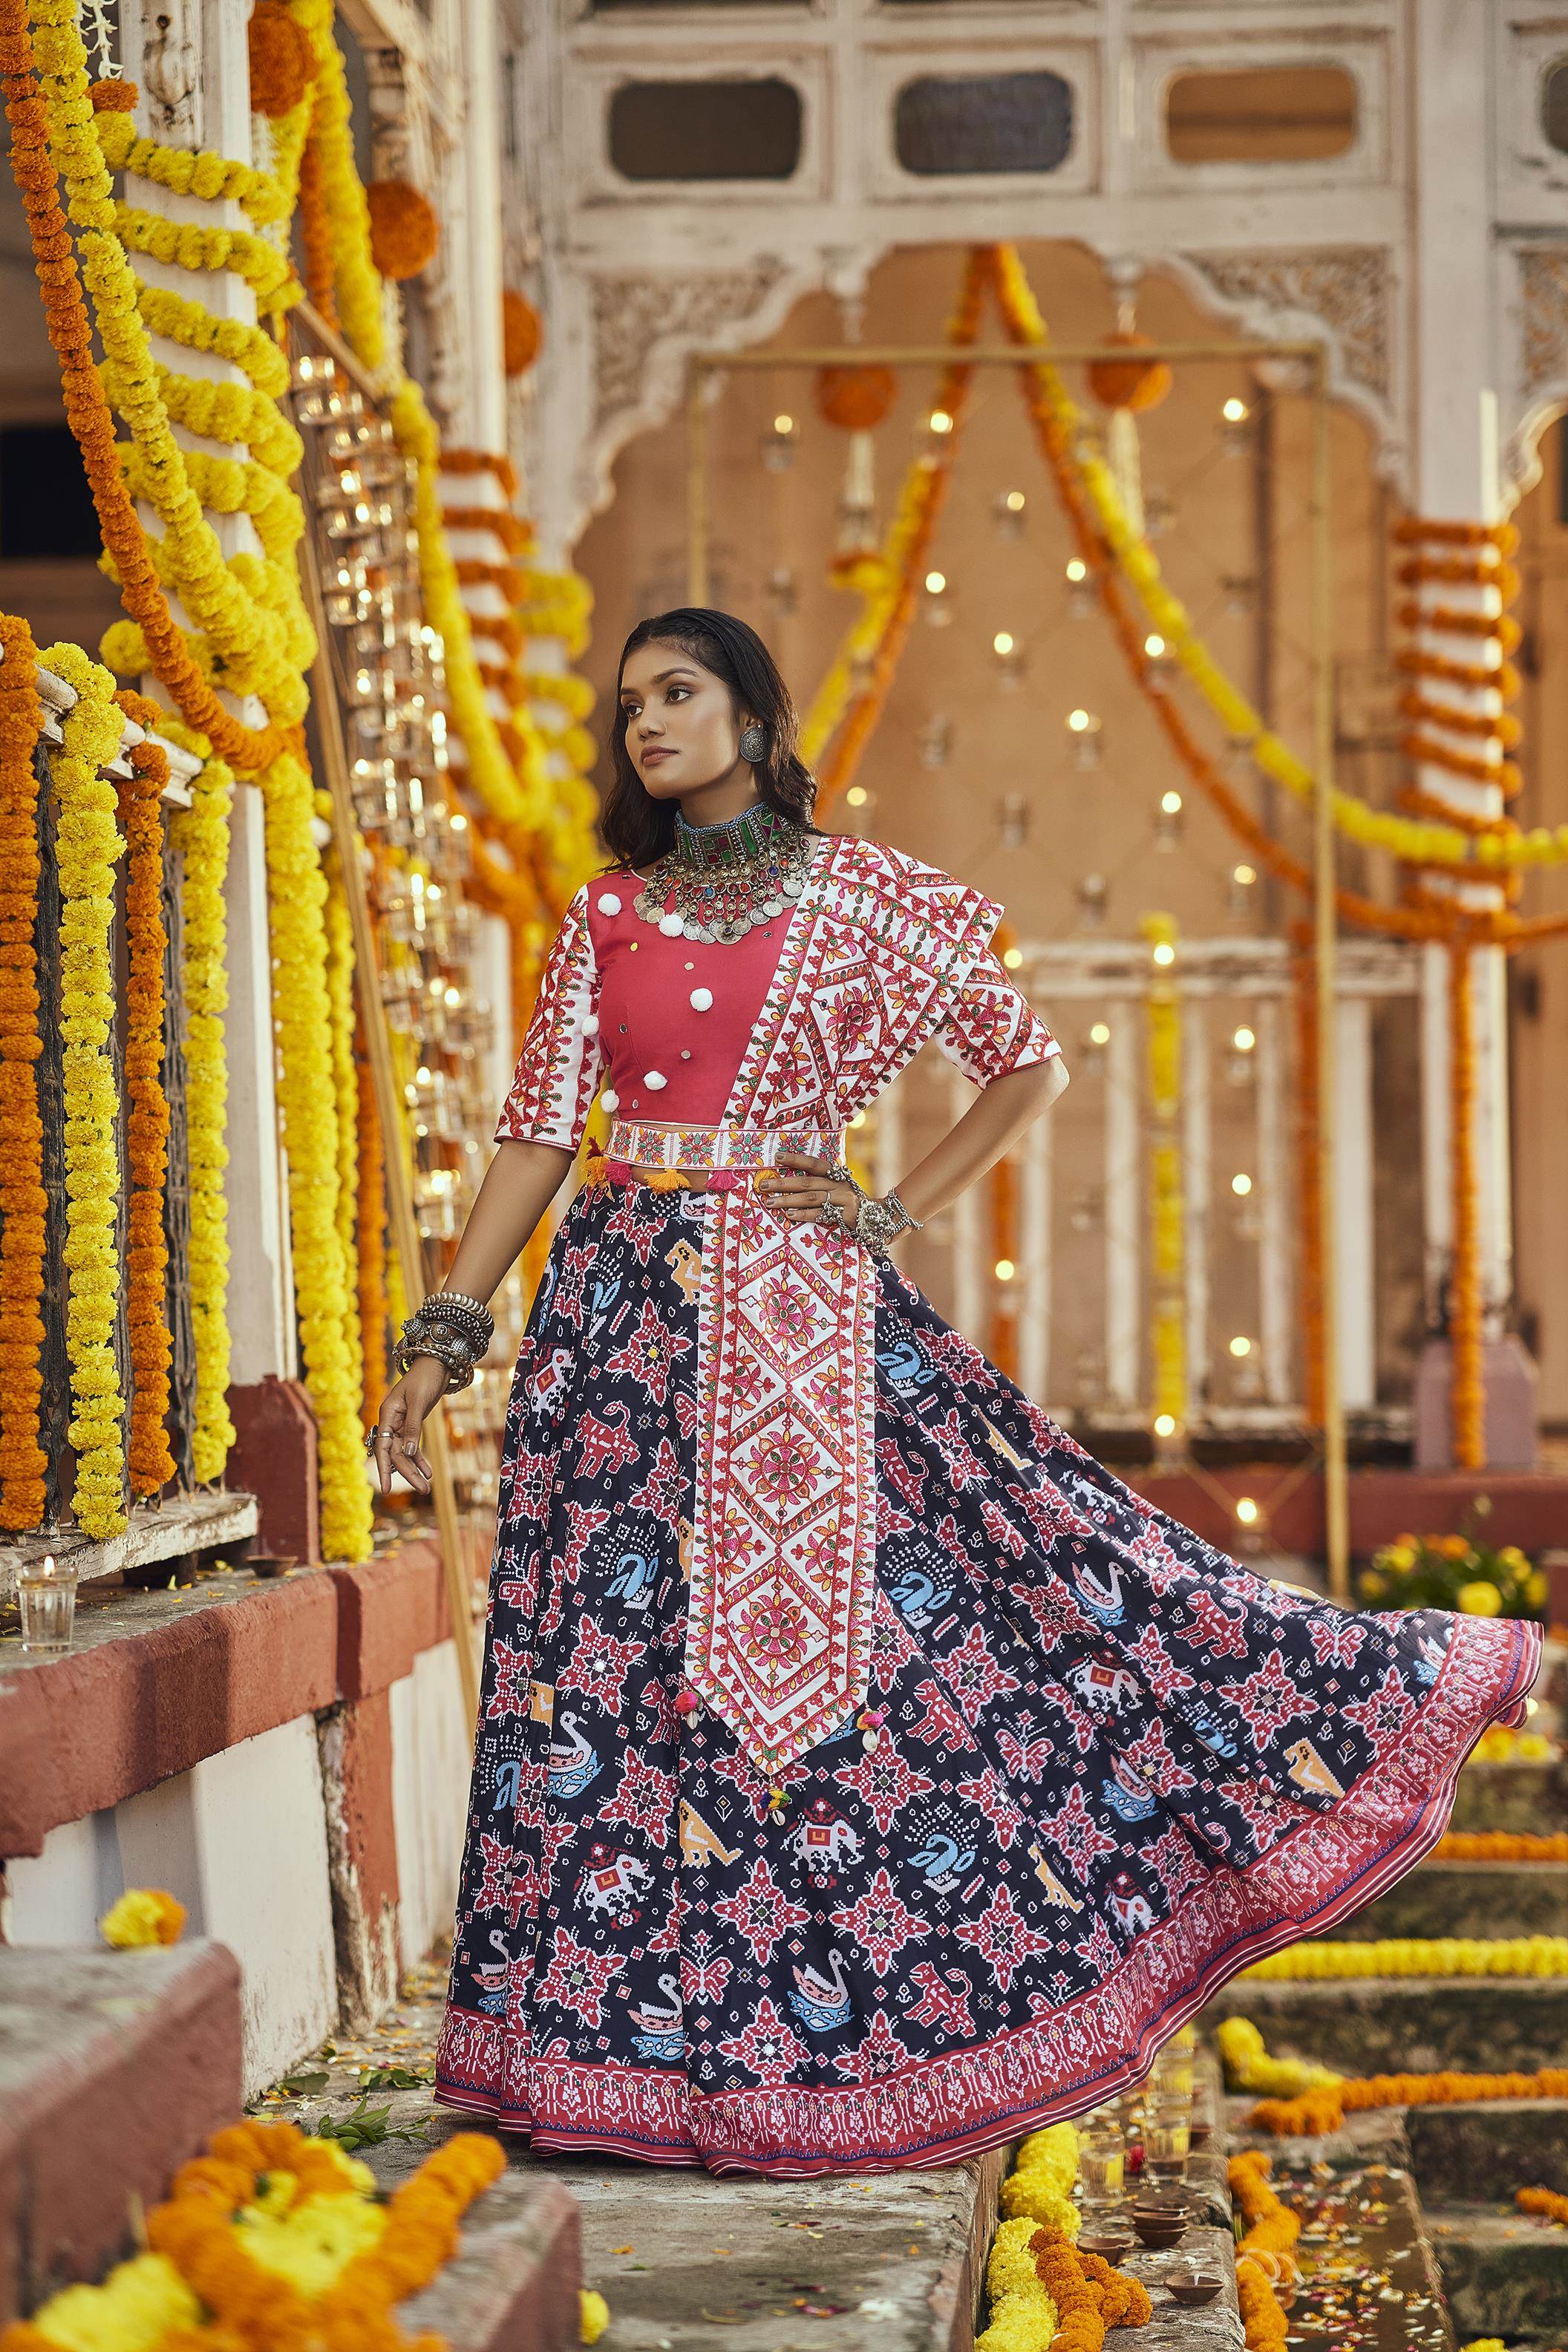 Fully Stitched Georgette Lehenga Set in Various Colors Yellow, Red, Black,  Pink. Ready to Wear Lehenga Choli, Readymade Lehenga, Crop Top - Etsy